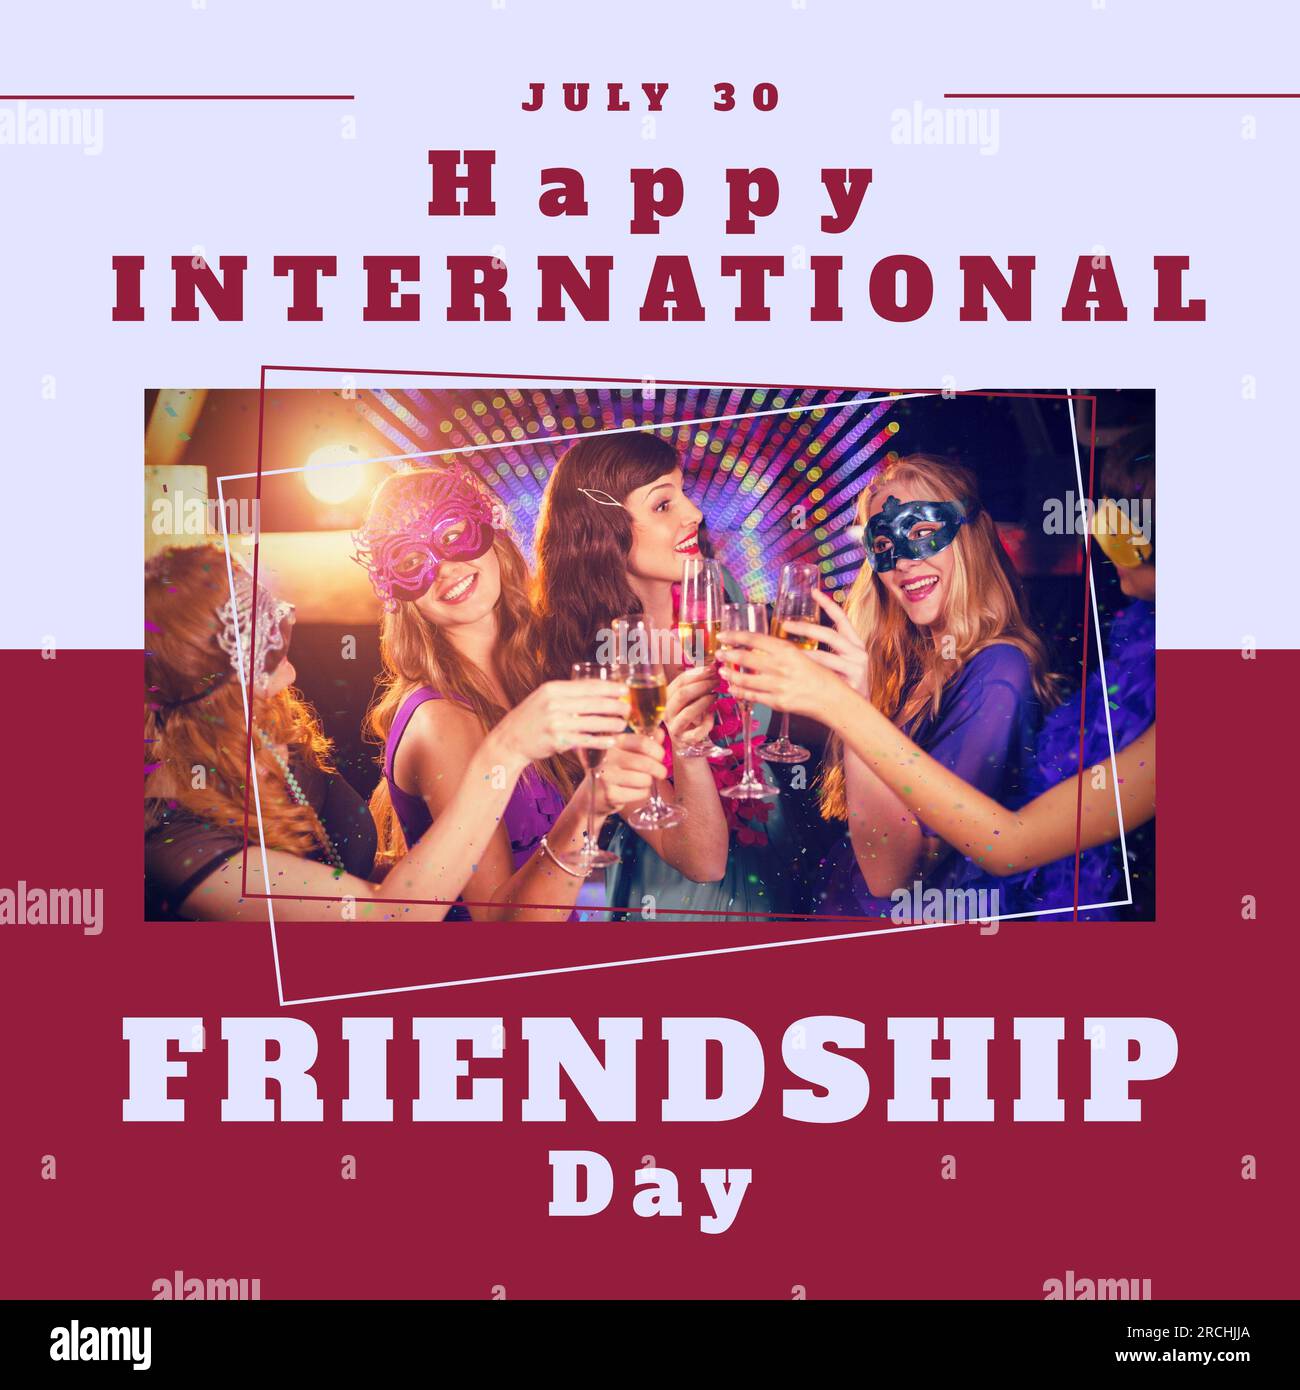 Happy international friendship day text with happy diverse female friends making a toast at party Stock Photo